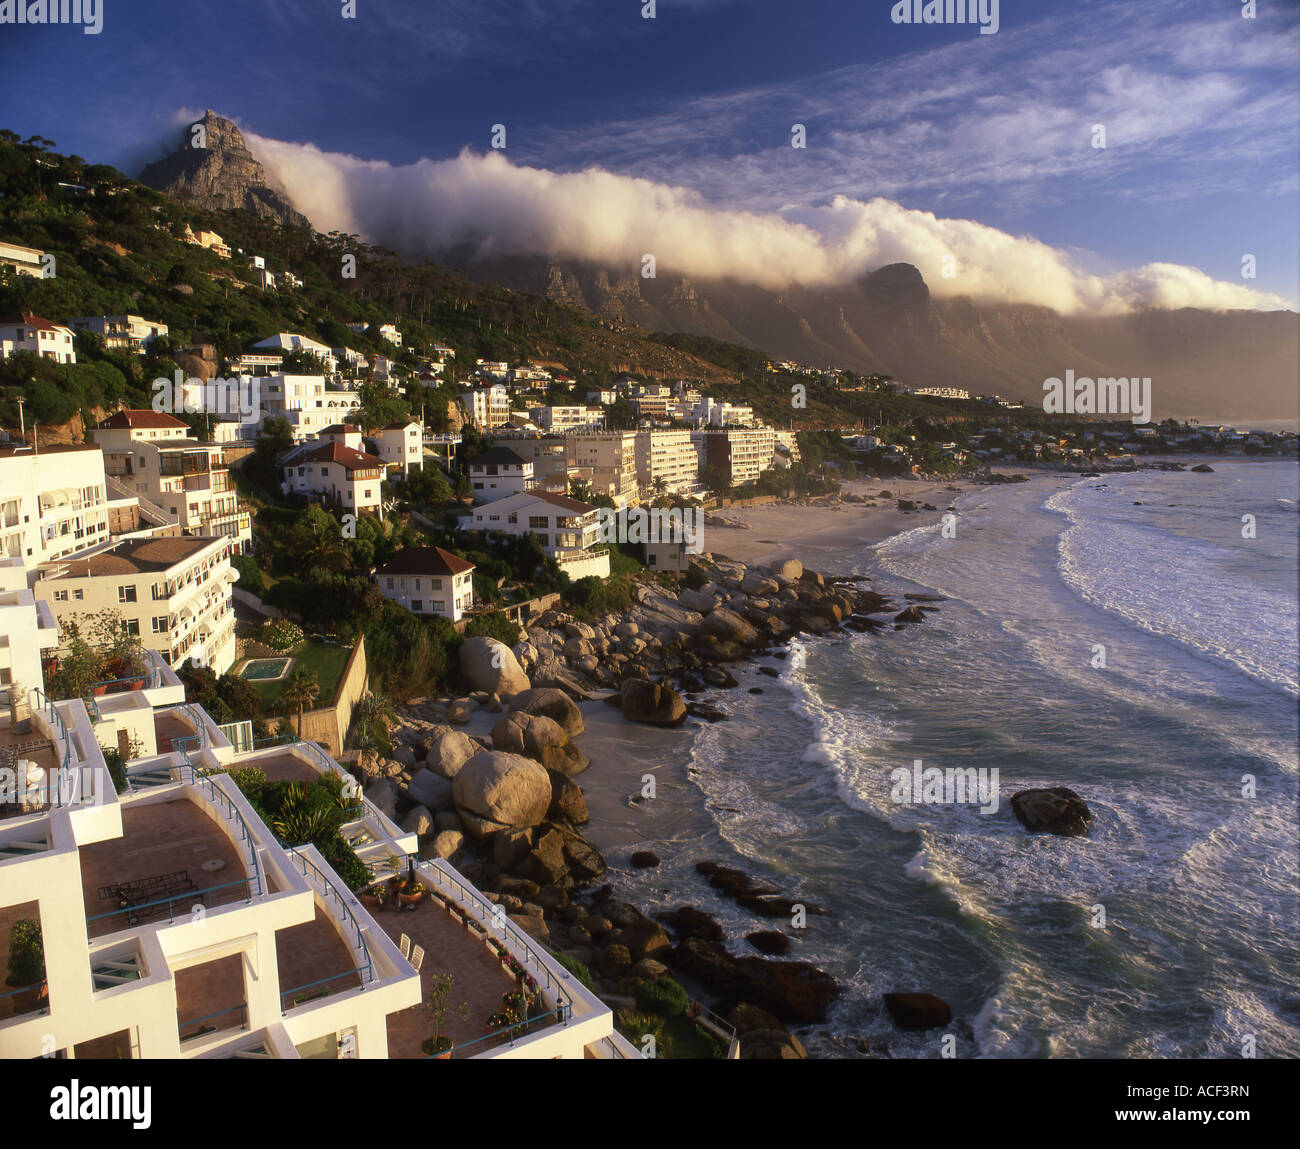 The Cape Town suburb of Clifton and the twelve Apostles covered in cloud in the background Stock Photo